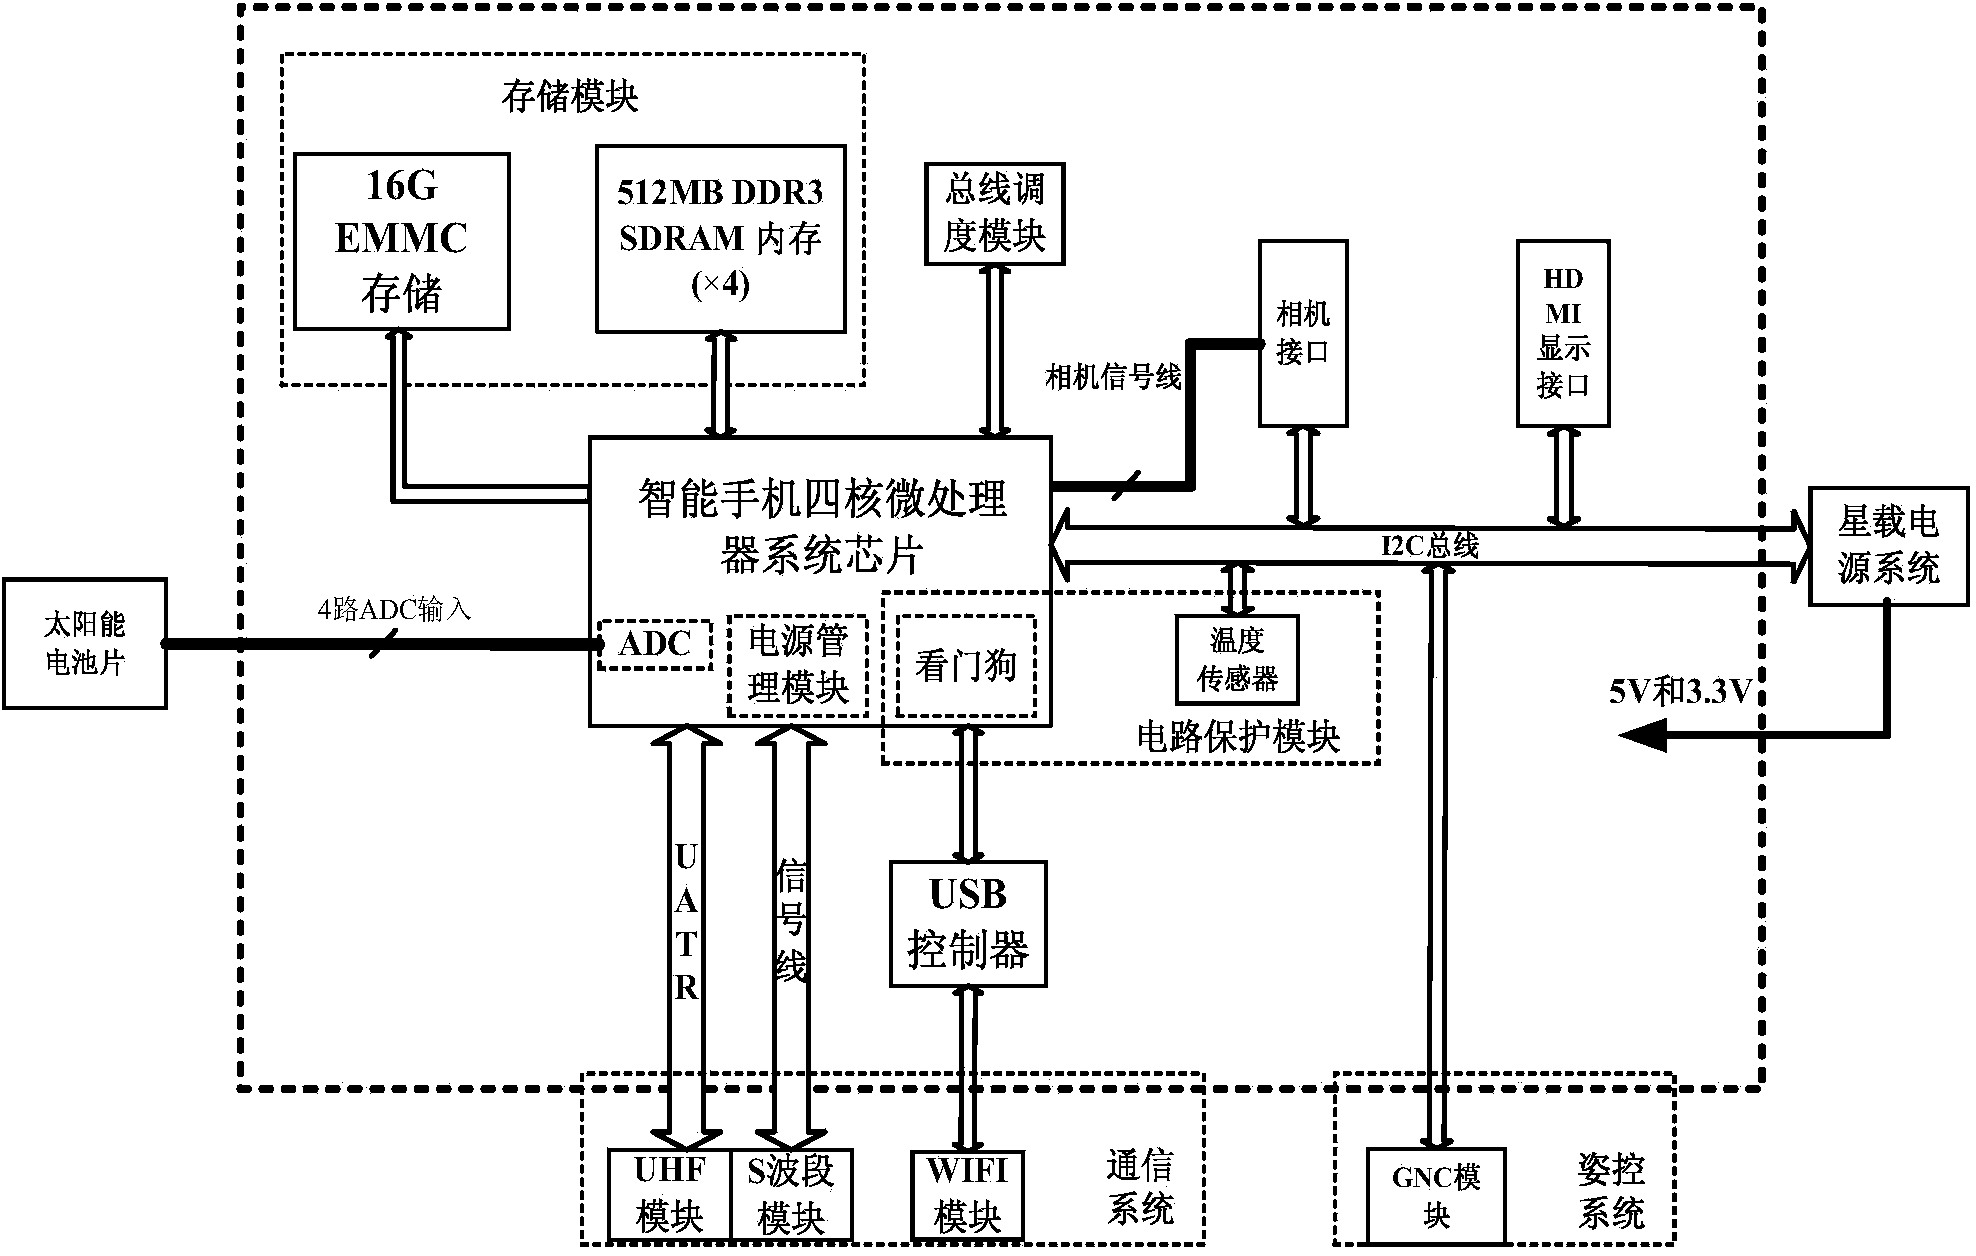 Pico-satellite computer system based on quad-core microprocessor of android mobile phone